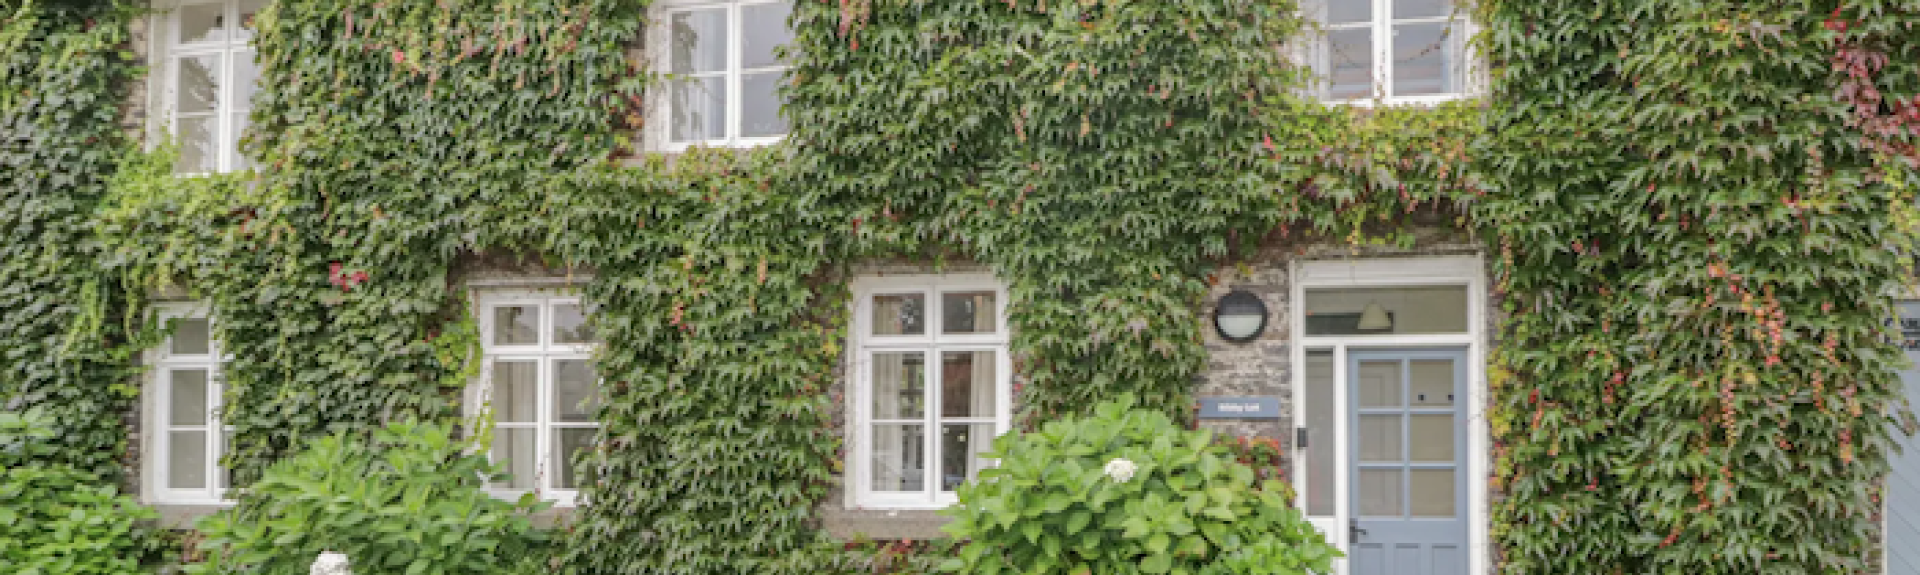 Ivy-clad exterior of a stone holiday cottage in Hawkshead, Cumbria, with a lawn to the front.